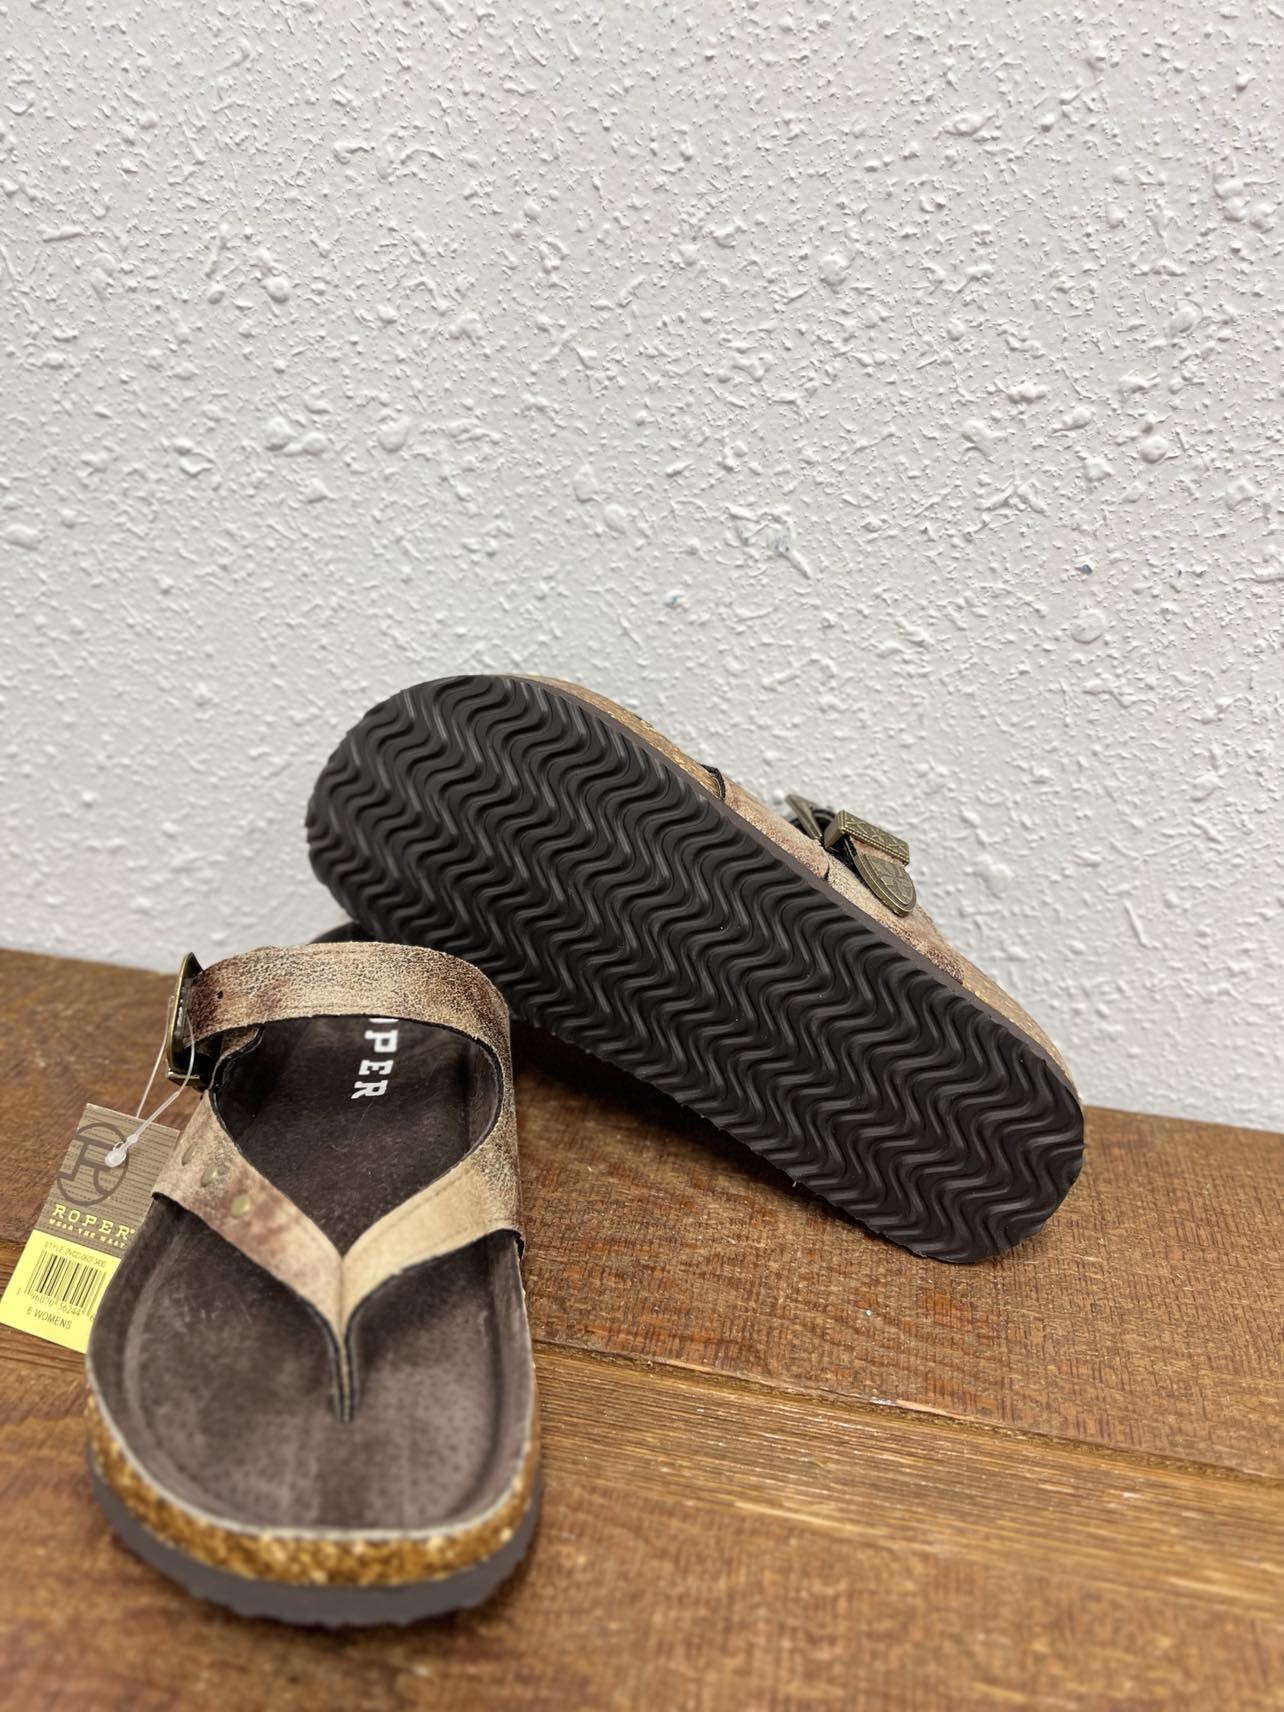 Roper Corrina Sandal in Tan-Sandals-Roper-Lucky J Boots & More, Women's, Men's, & Kids Western Store Located in Carthage, MO